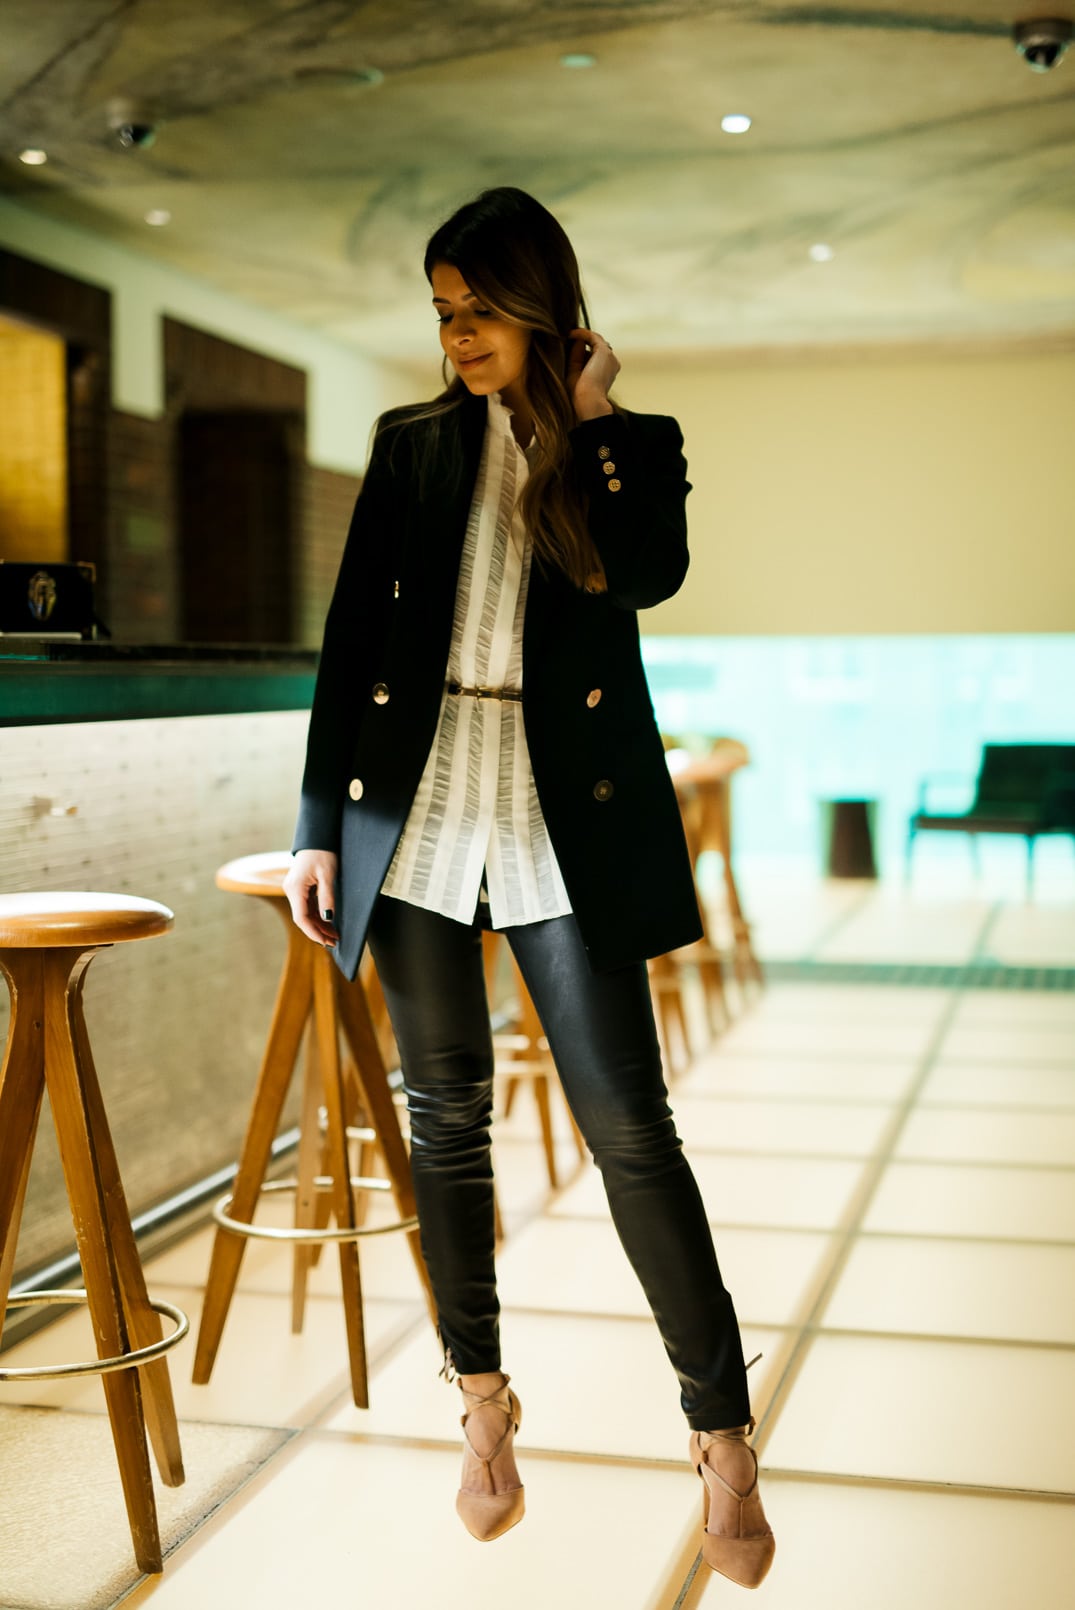 Pam Hetlinger, The Girl From Panama wearing a Reiss double breasted blazer, high neck white shirt, leather leggings and pointed toe blush pumps. New York Fashion Week